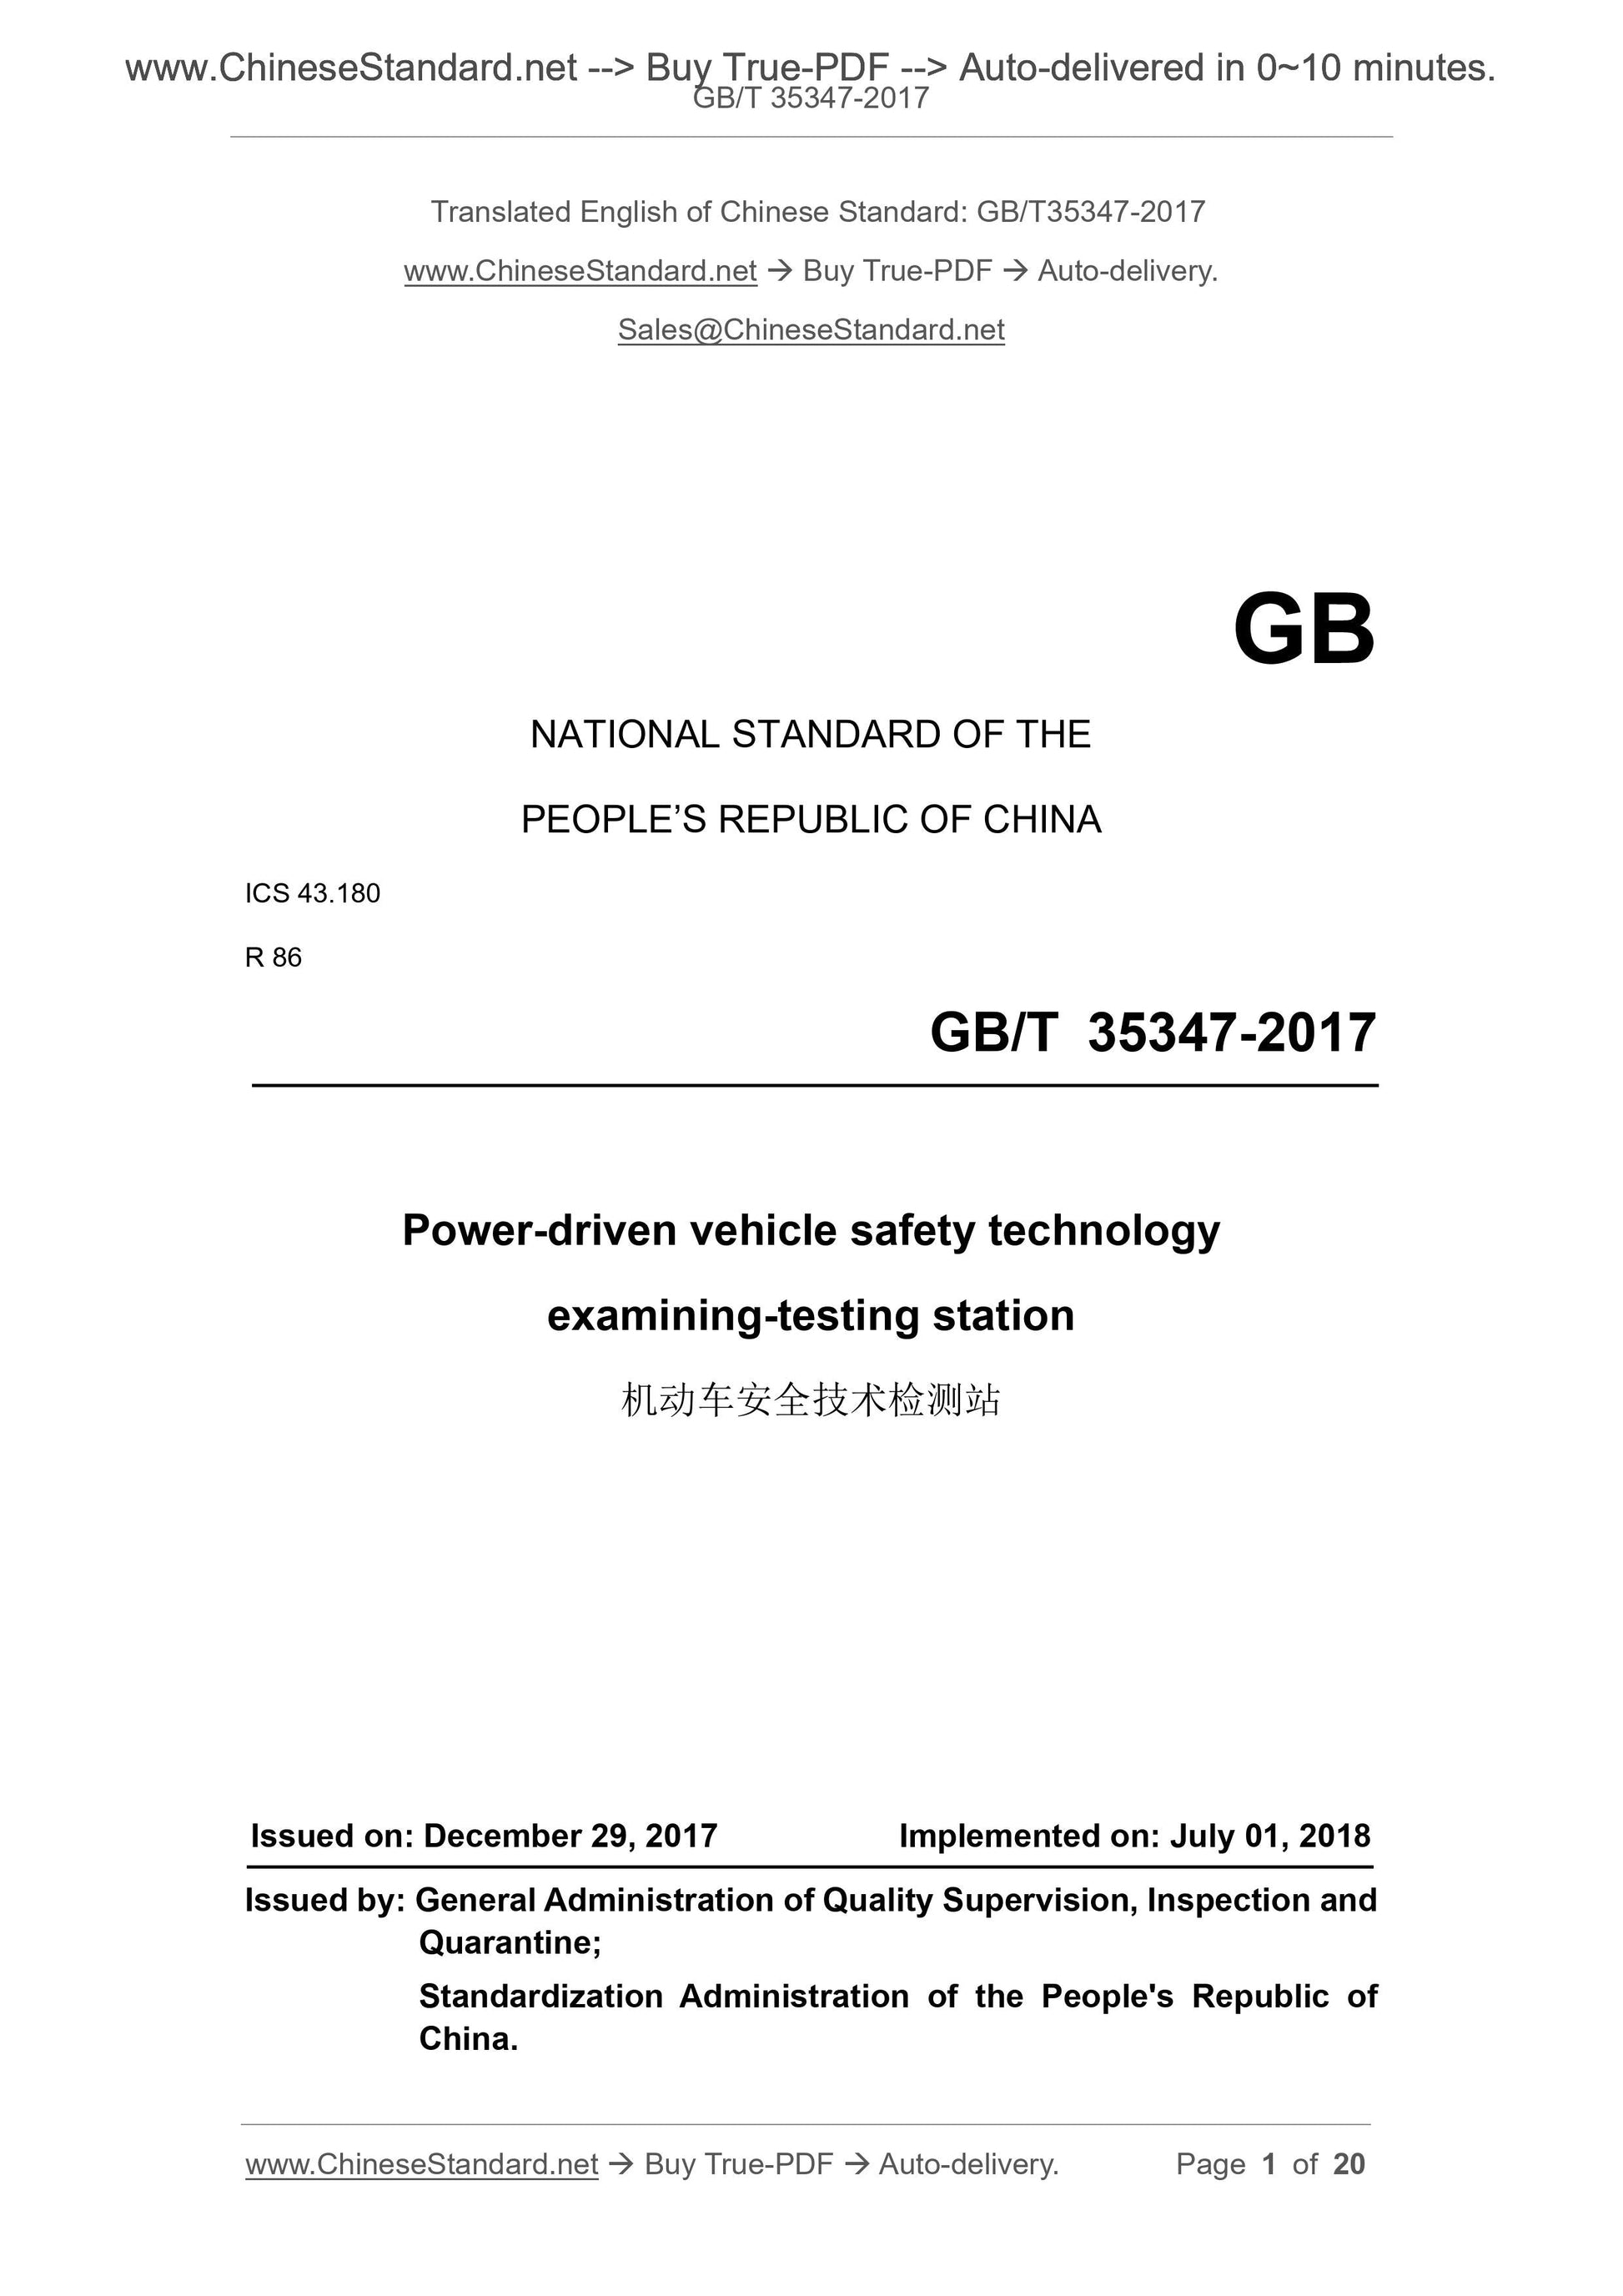 GB/T 35347-2017 Page 1